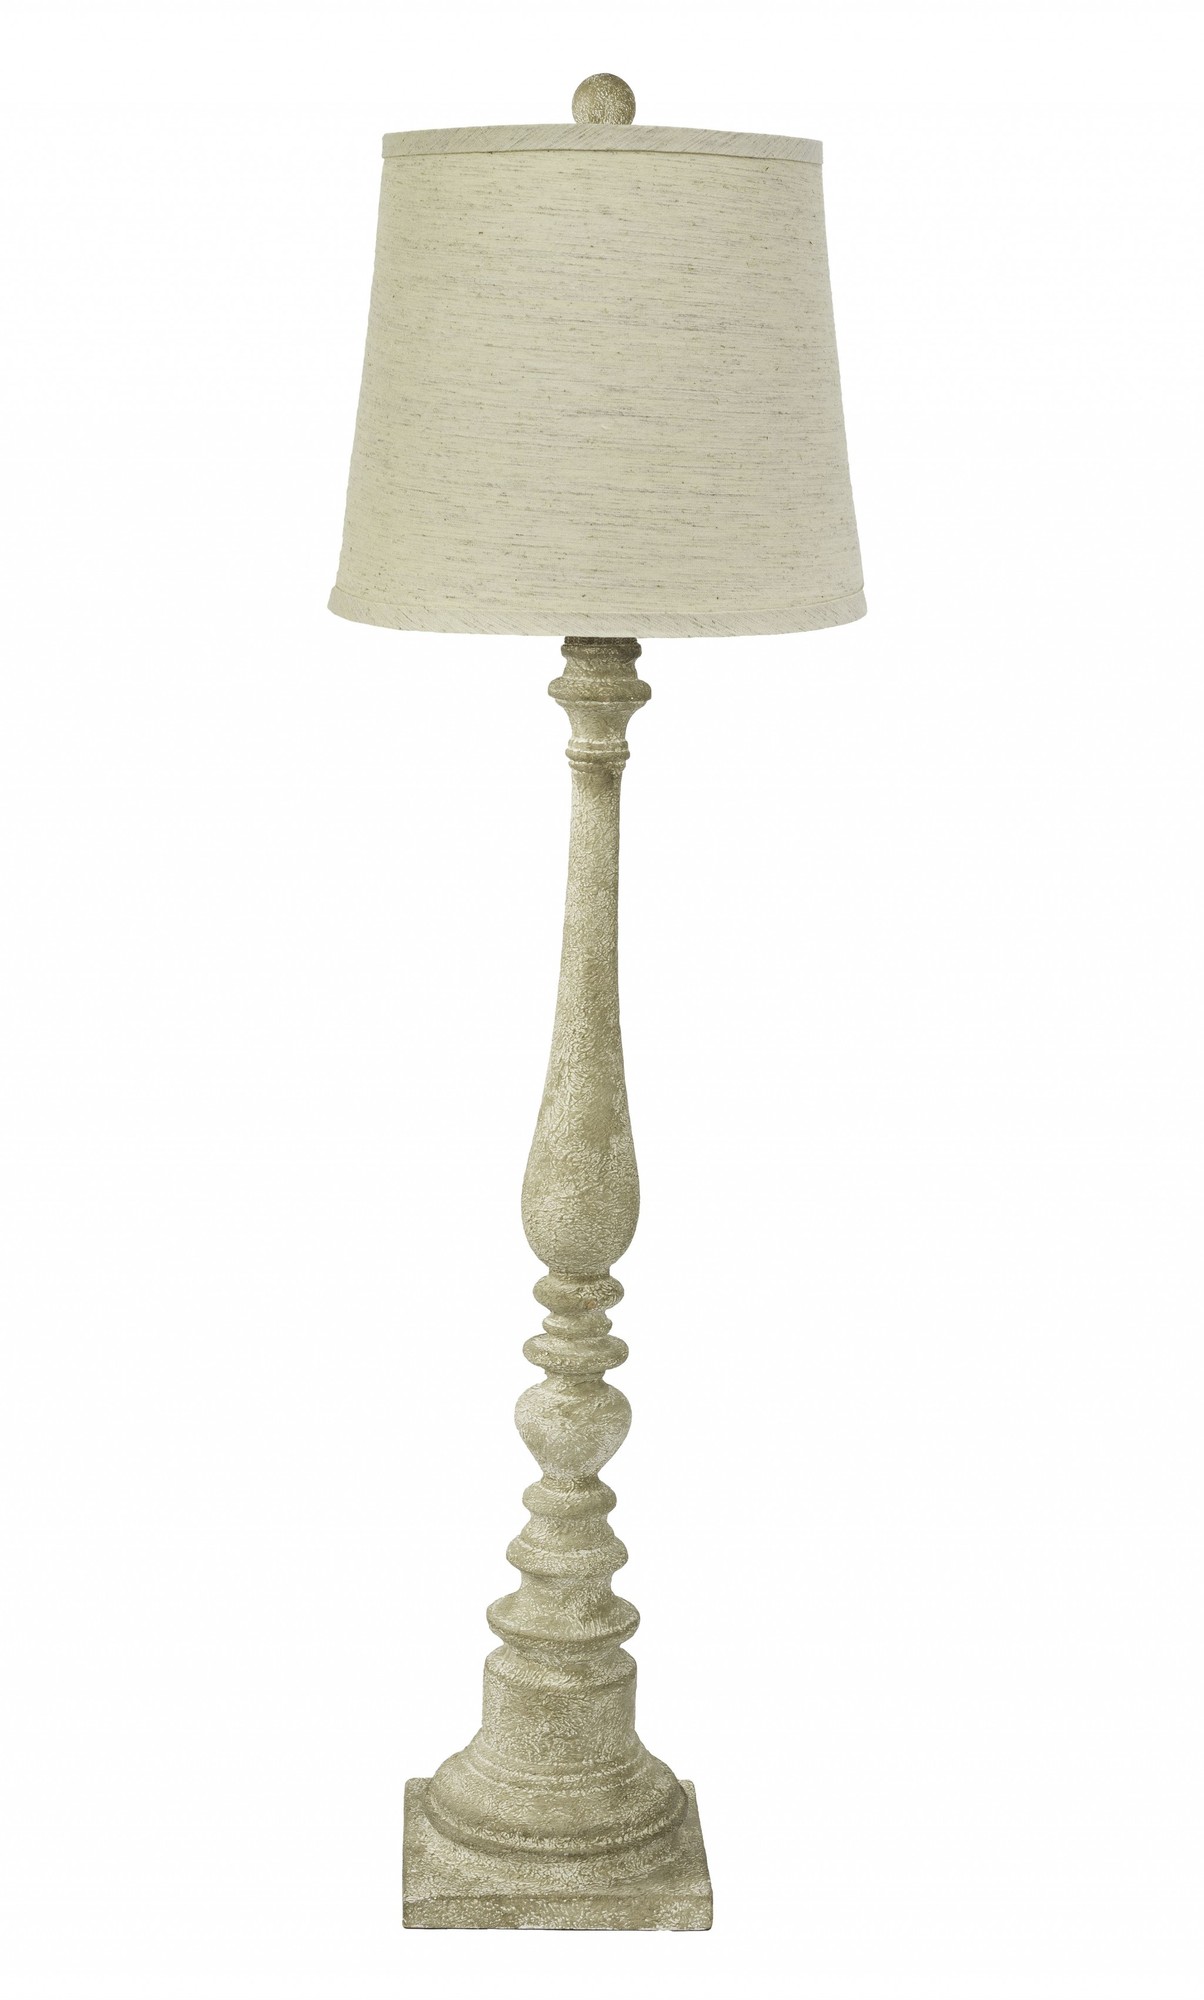 Tall Distressed Look Table Lamp with Classic Neutral Shade